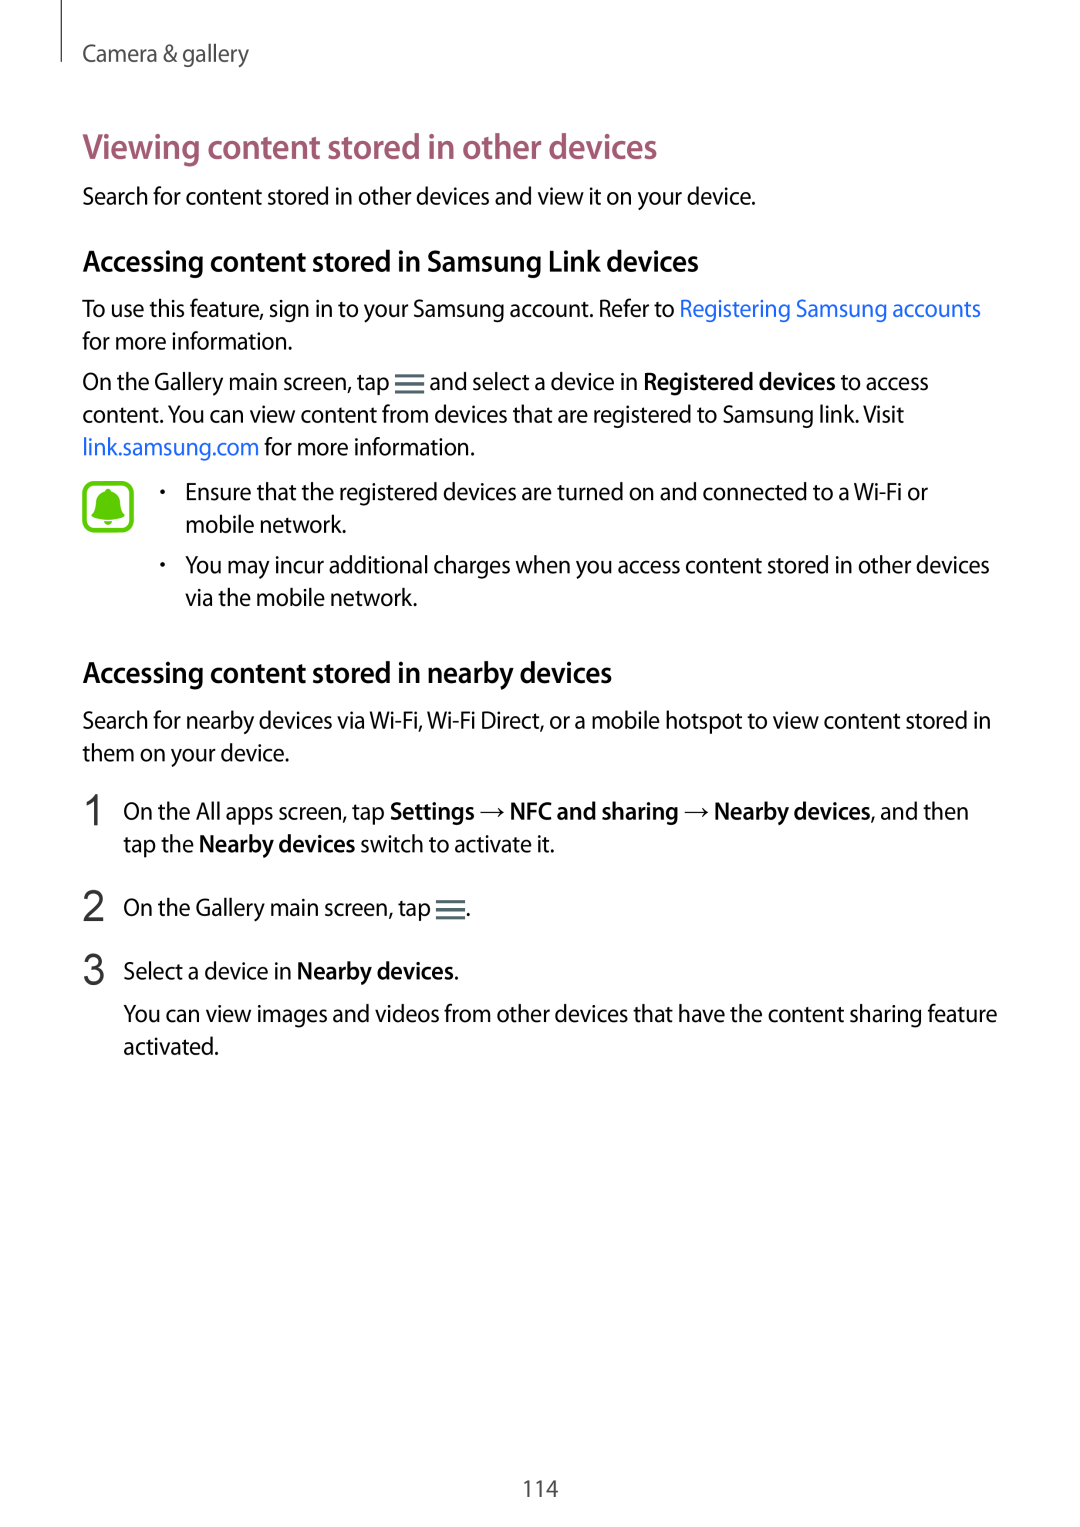 Samsung SM-N915FZWYORX manual Viewing content stored in other devices, Accessing content stored in Samsung Link devices 